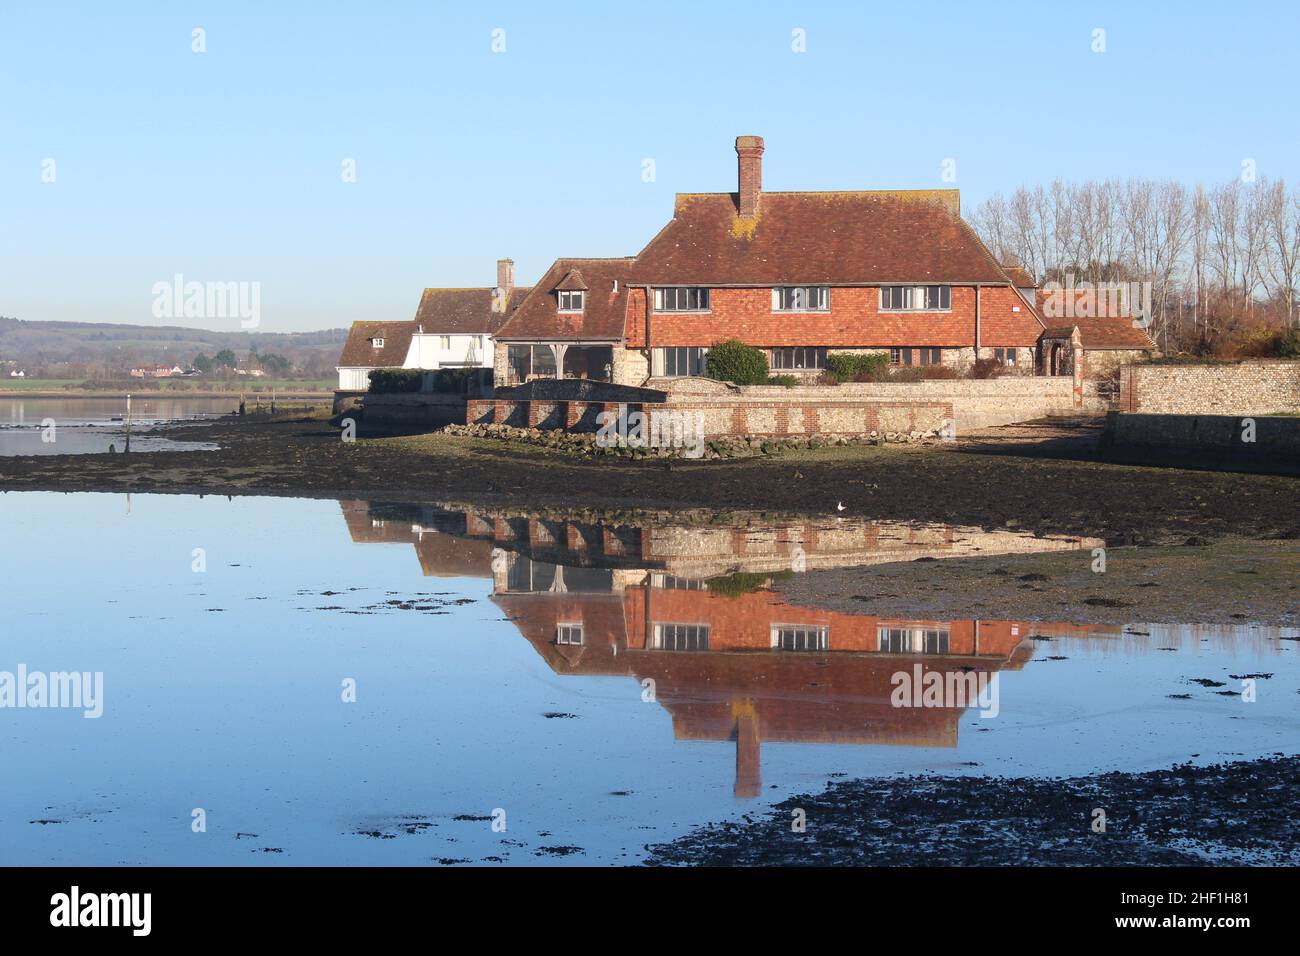 Residential building adjacent to Bosham Meadow Green with building's reflection in the water. South Downs National Park can be seen in the distance. Stock Photo